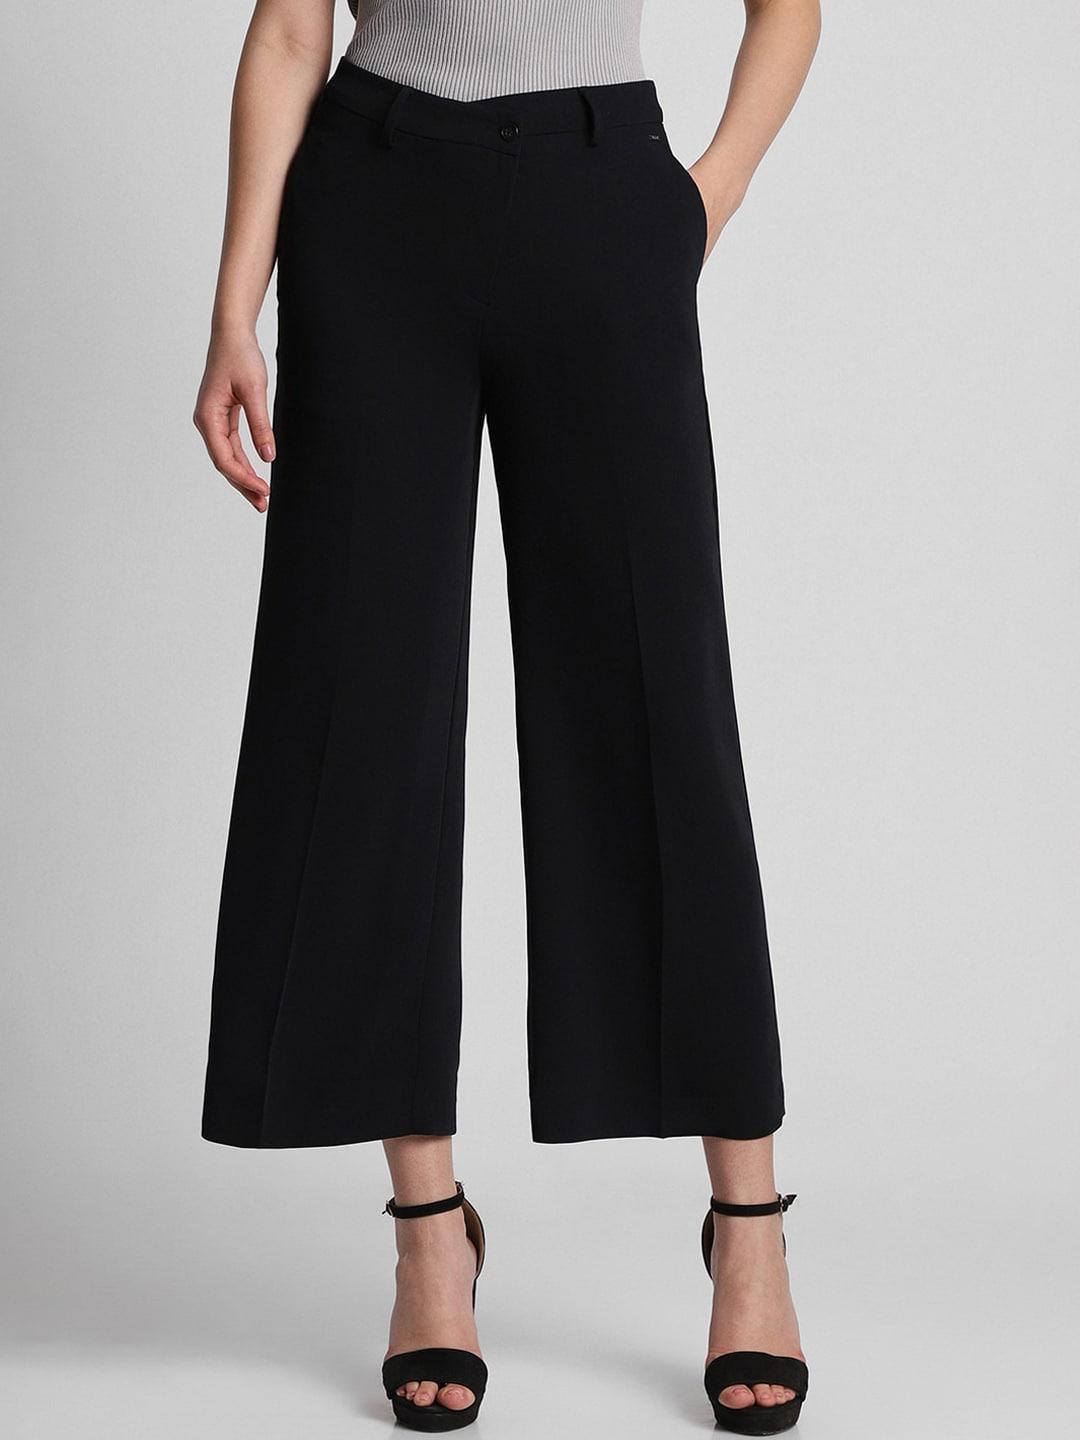 allen-solly-woman-mid-rise-cropped-culottes-trousers